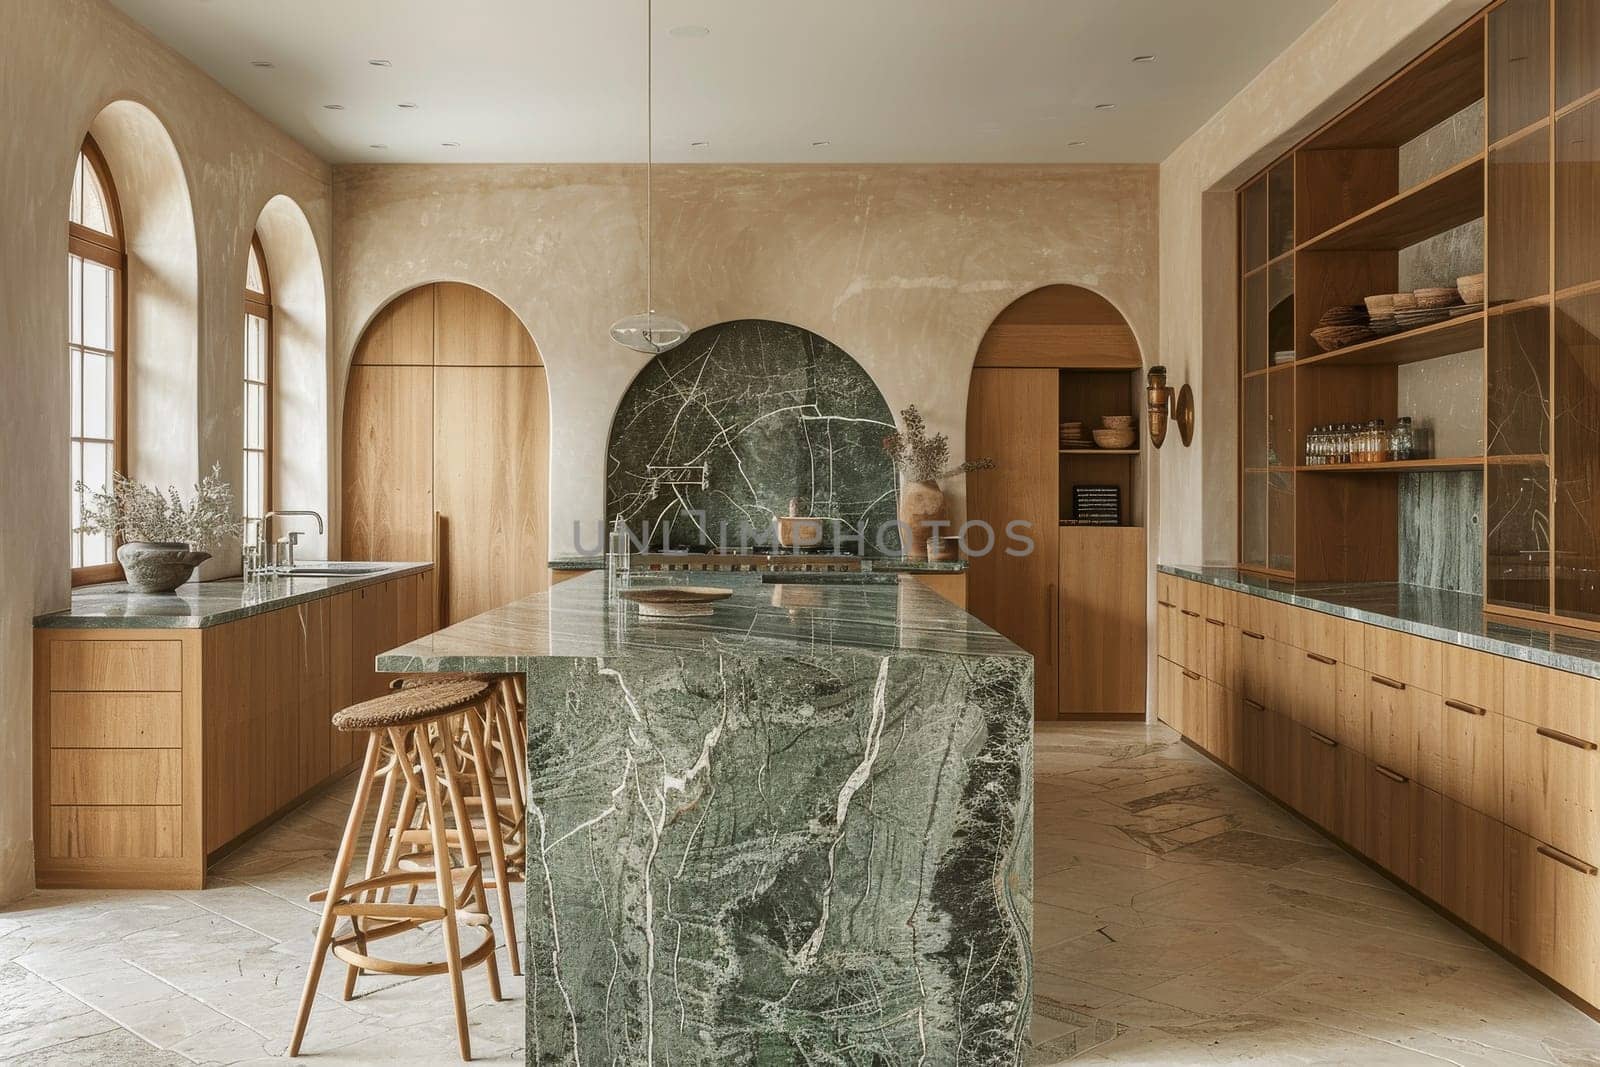 A kitchen with a marble countertop and wooden cabinets. The kitchen has a modern and elegant feel to it